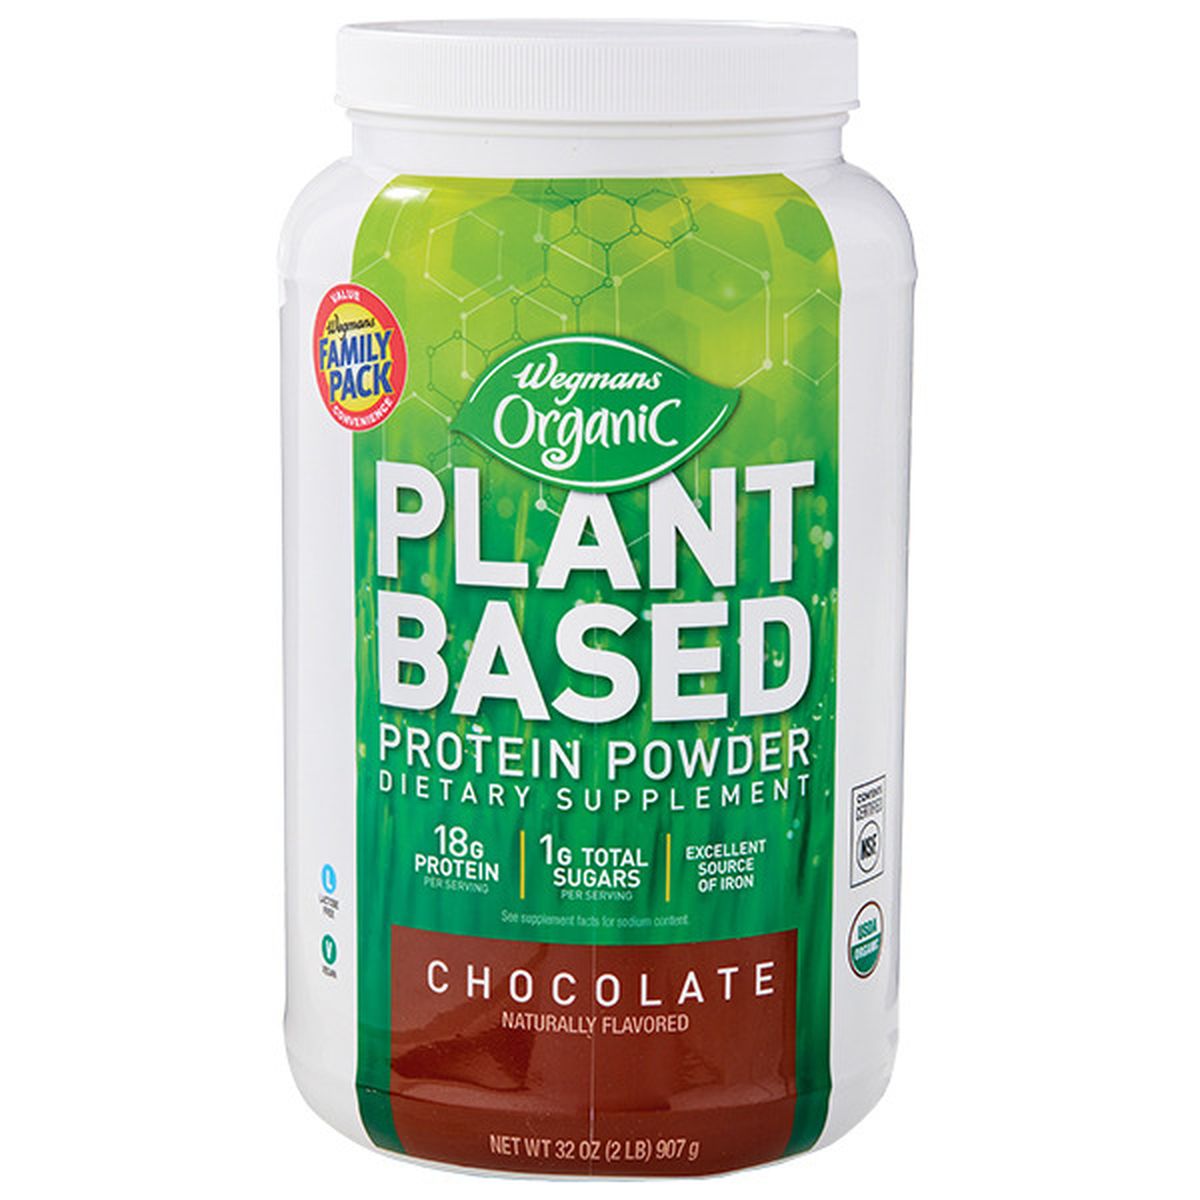 Calories in Wegmans Organic Plant Based Chocolate Protein Powder, FAMILY PACK